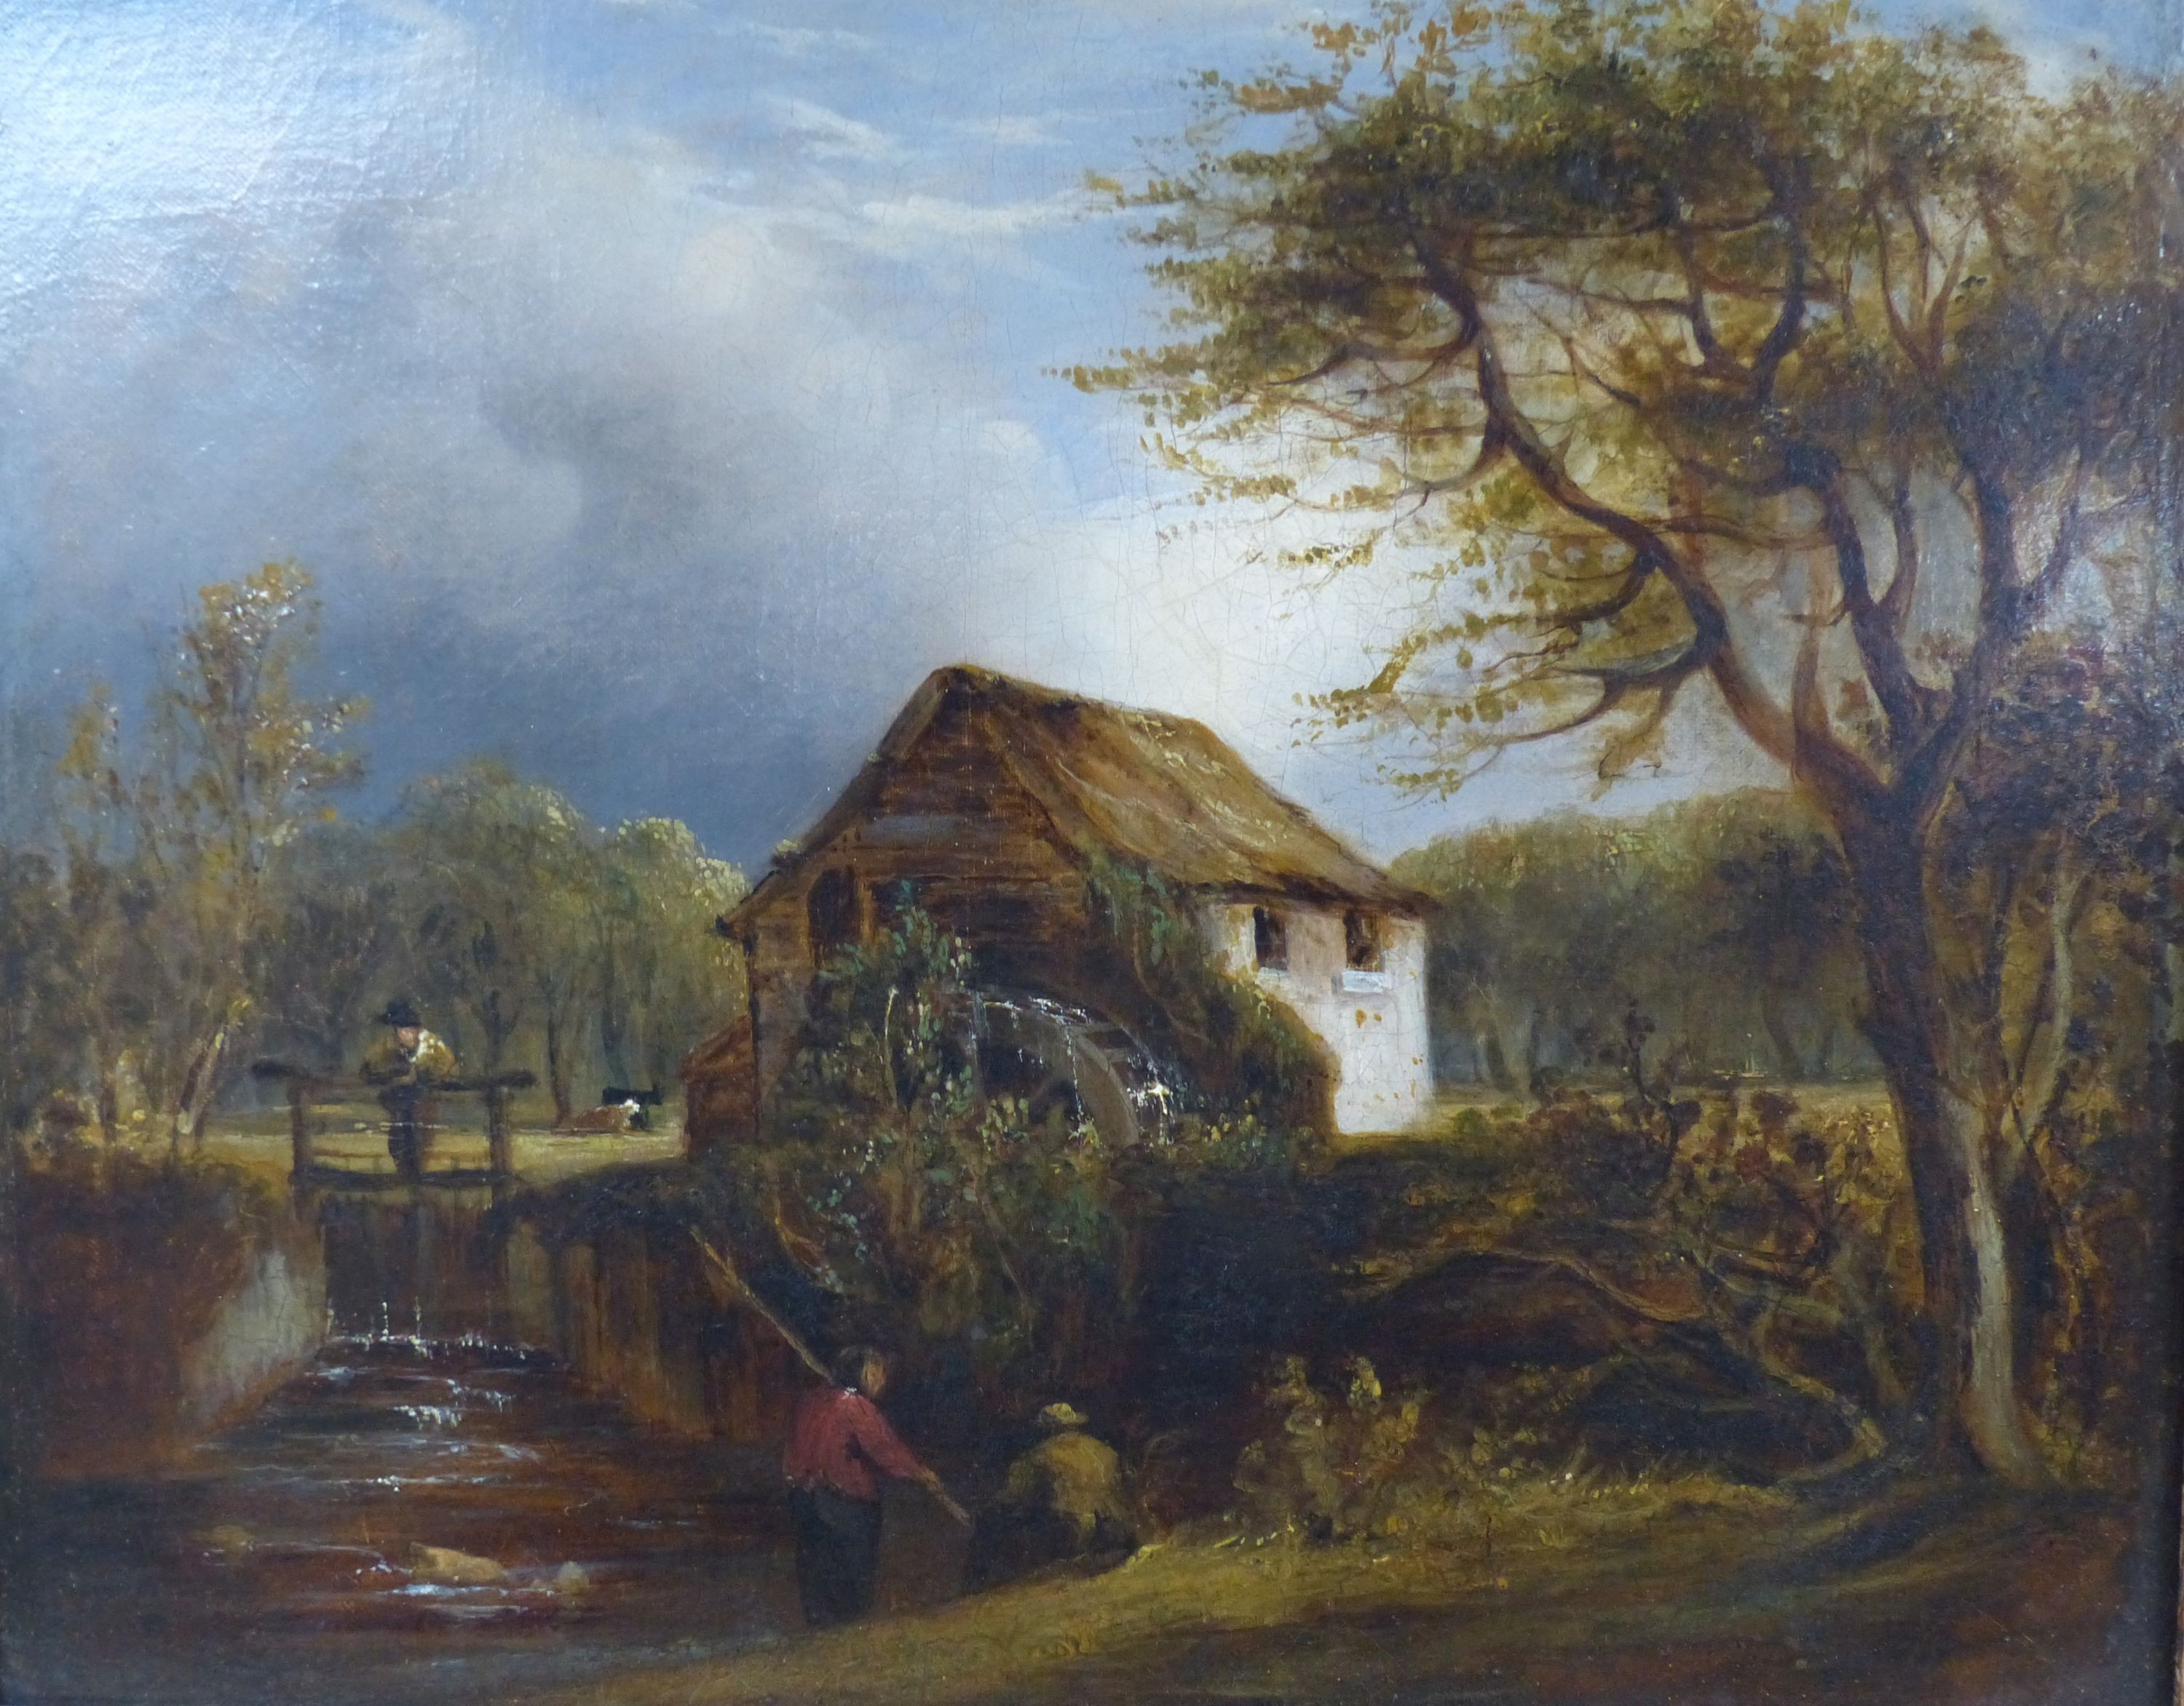 Attributed to Thomas Creswick R.A. (1811-1869), oil on canvas, Figures beside a watermill, 29 x 37cm